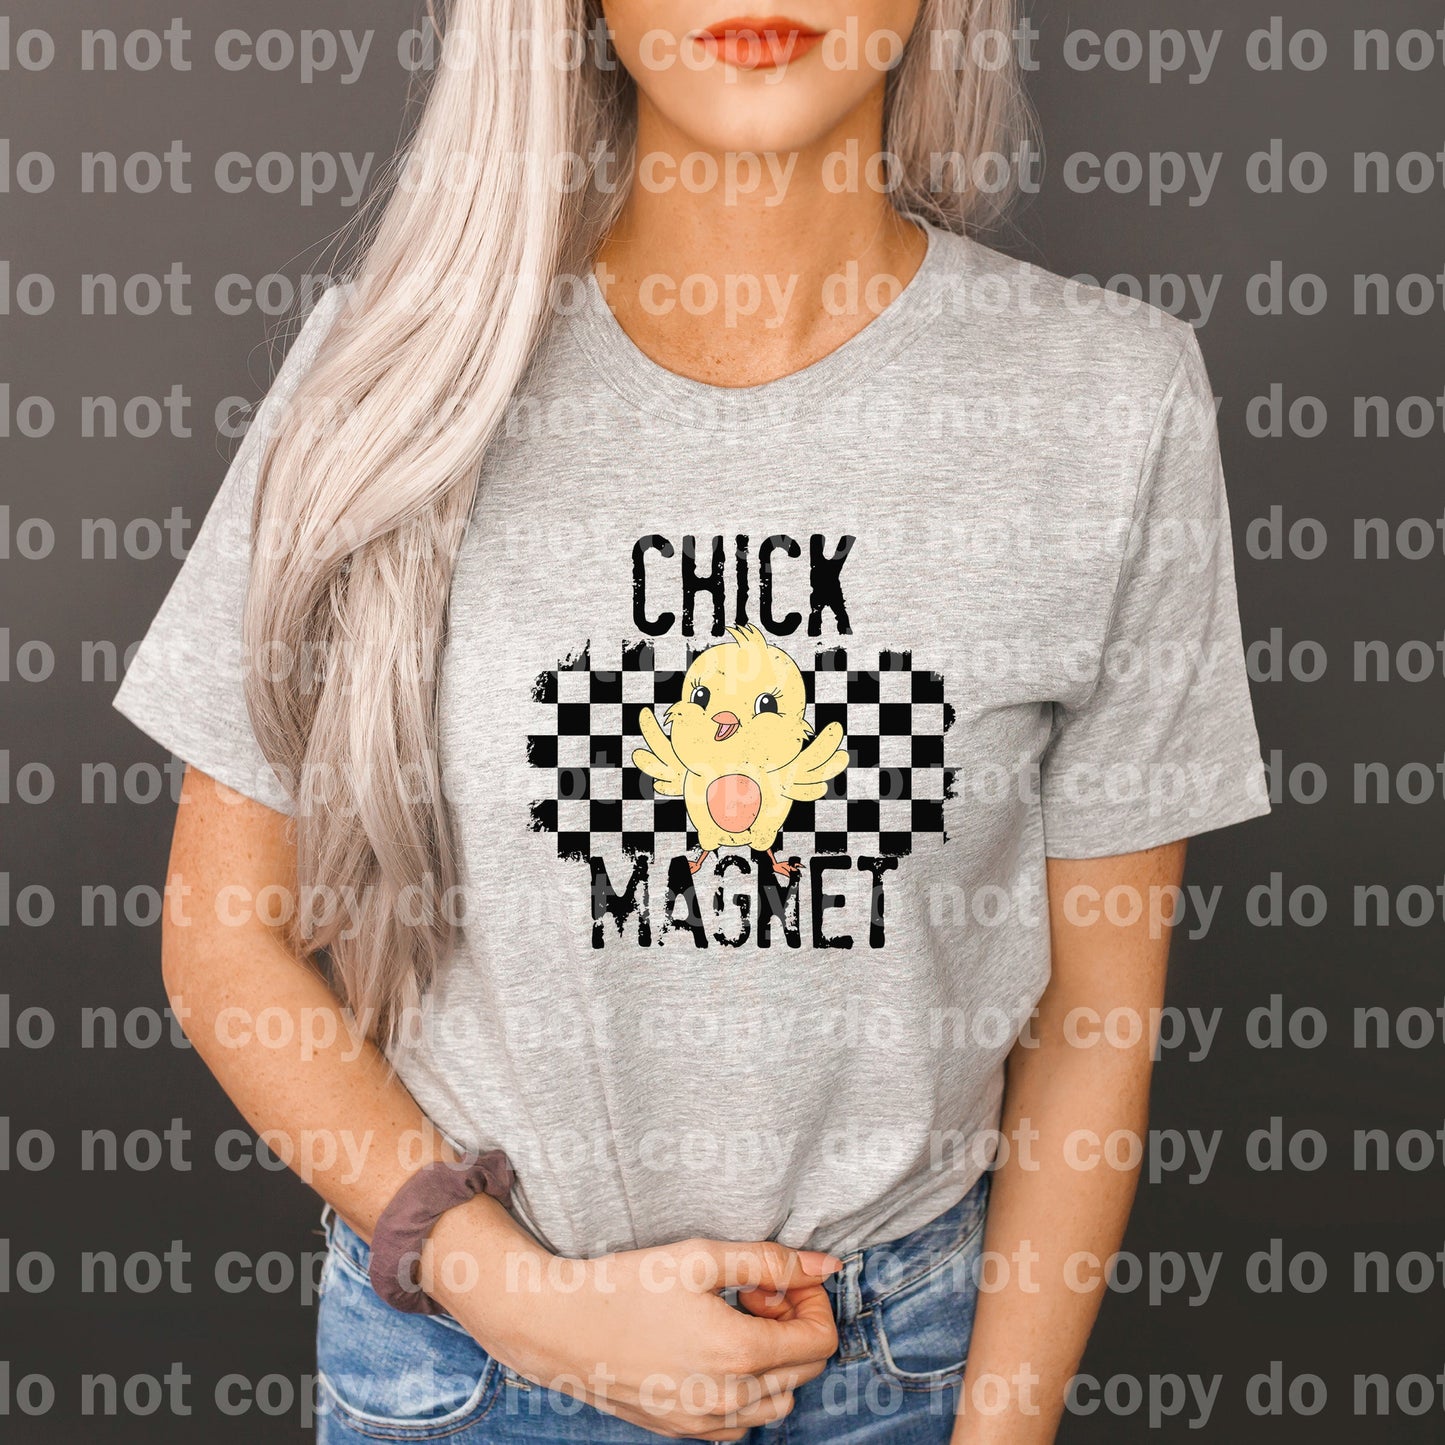 Chick Magnet Dream Print or Sublimation Print